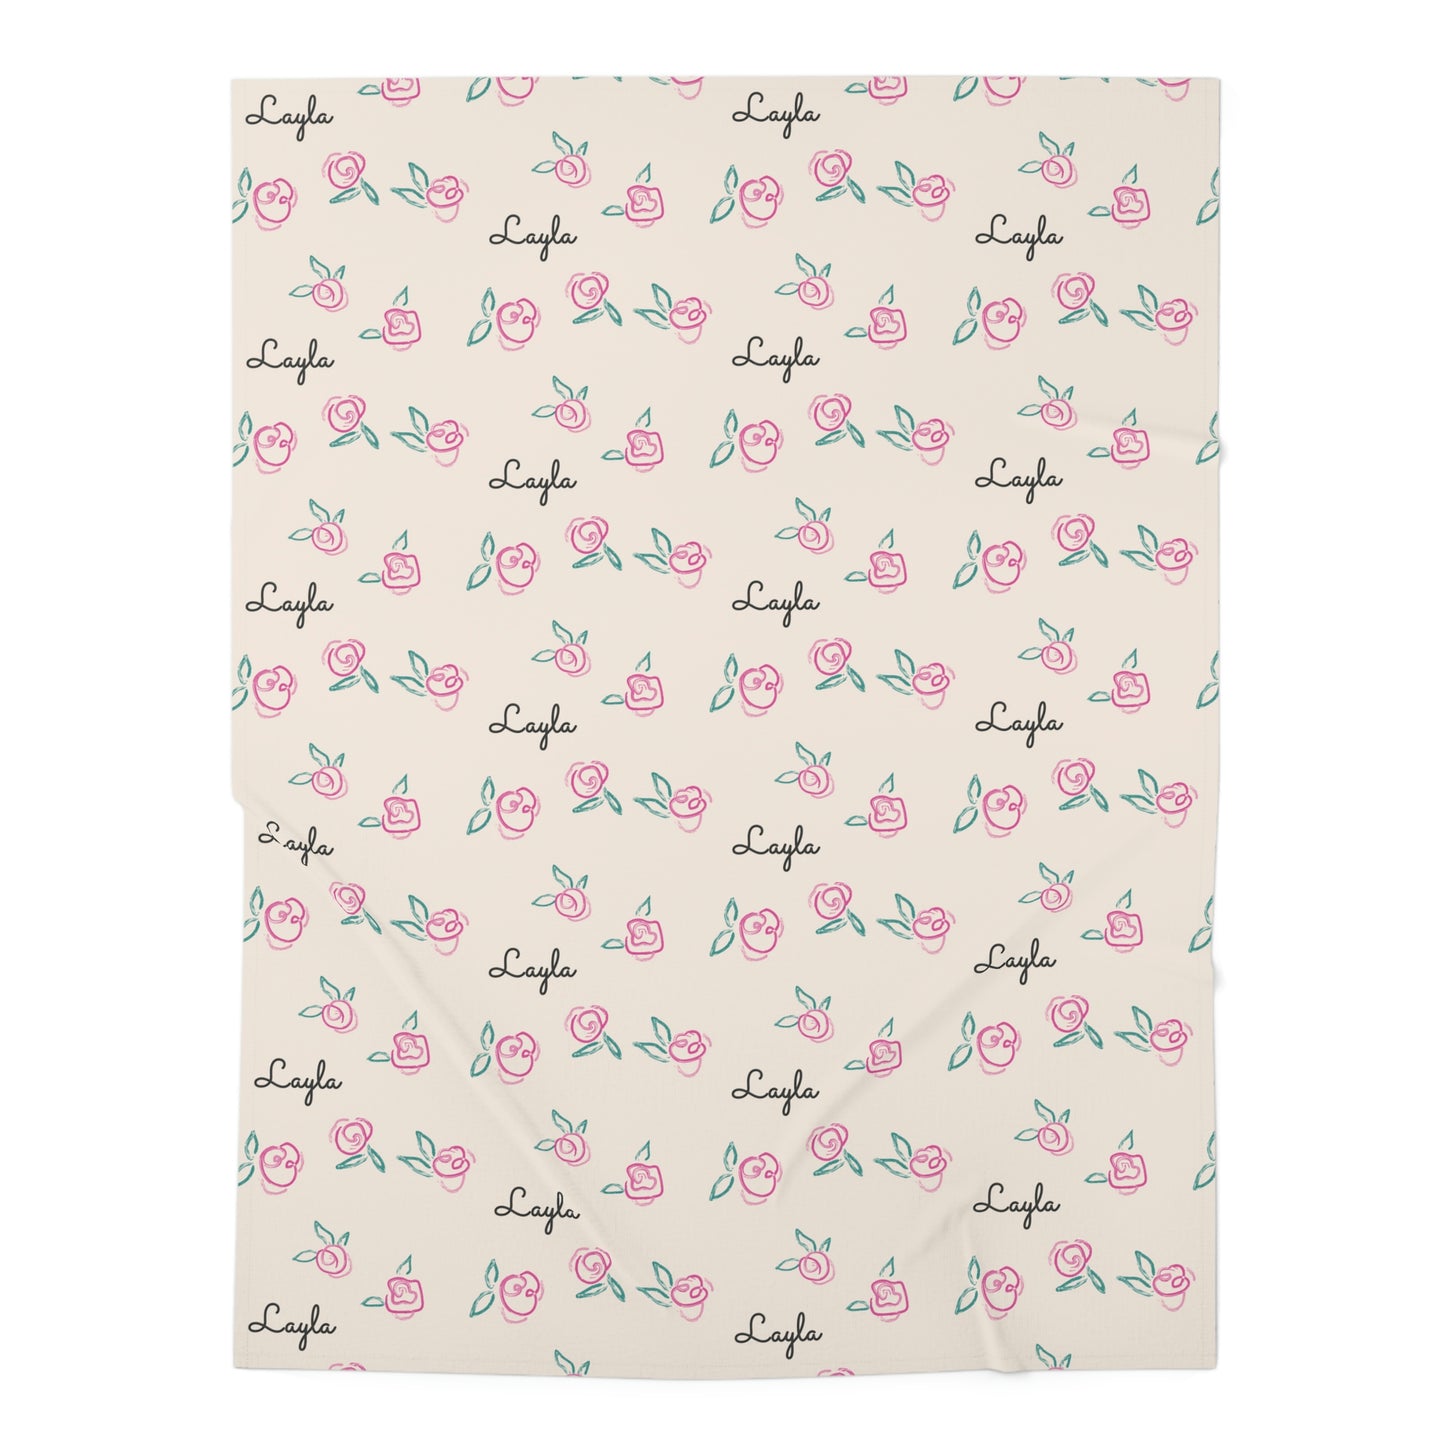 Jersey personalized baby blanket in pink rose with green leaves pattern laid flat